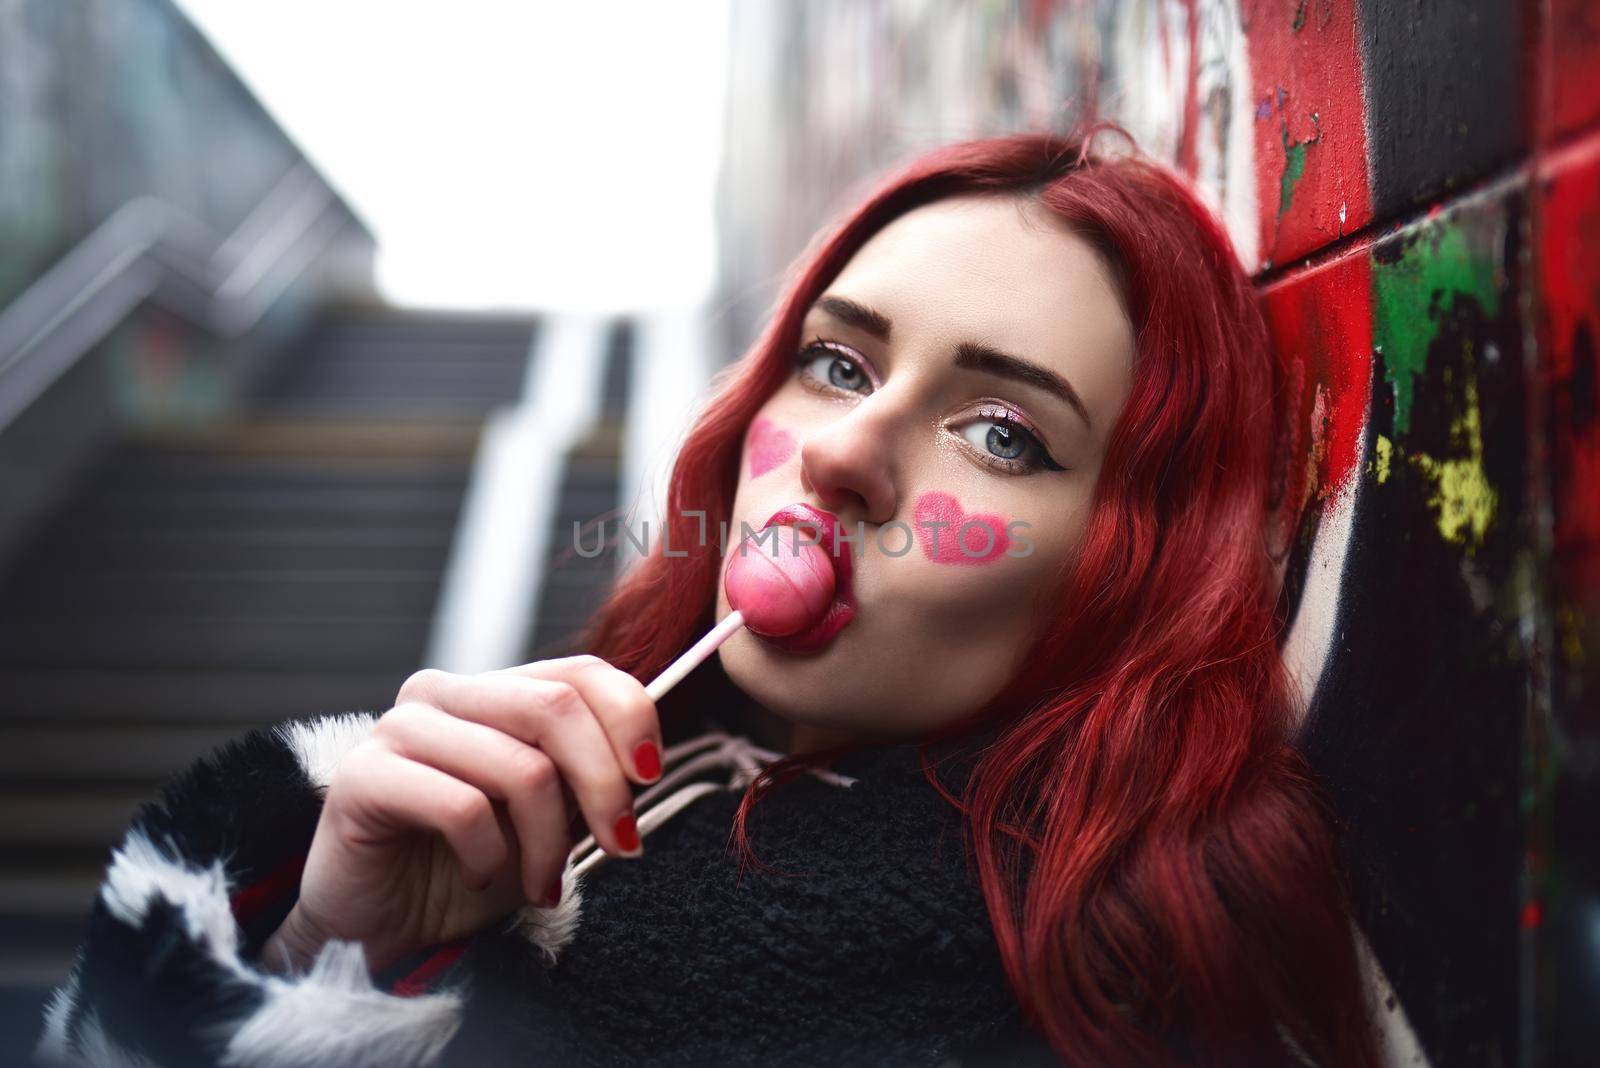 A glamorous teenage girl with red hair licks a sweet strawberry candy near a wall of graffiti. by Nickstock